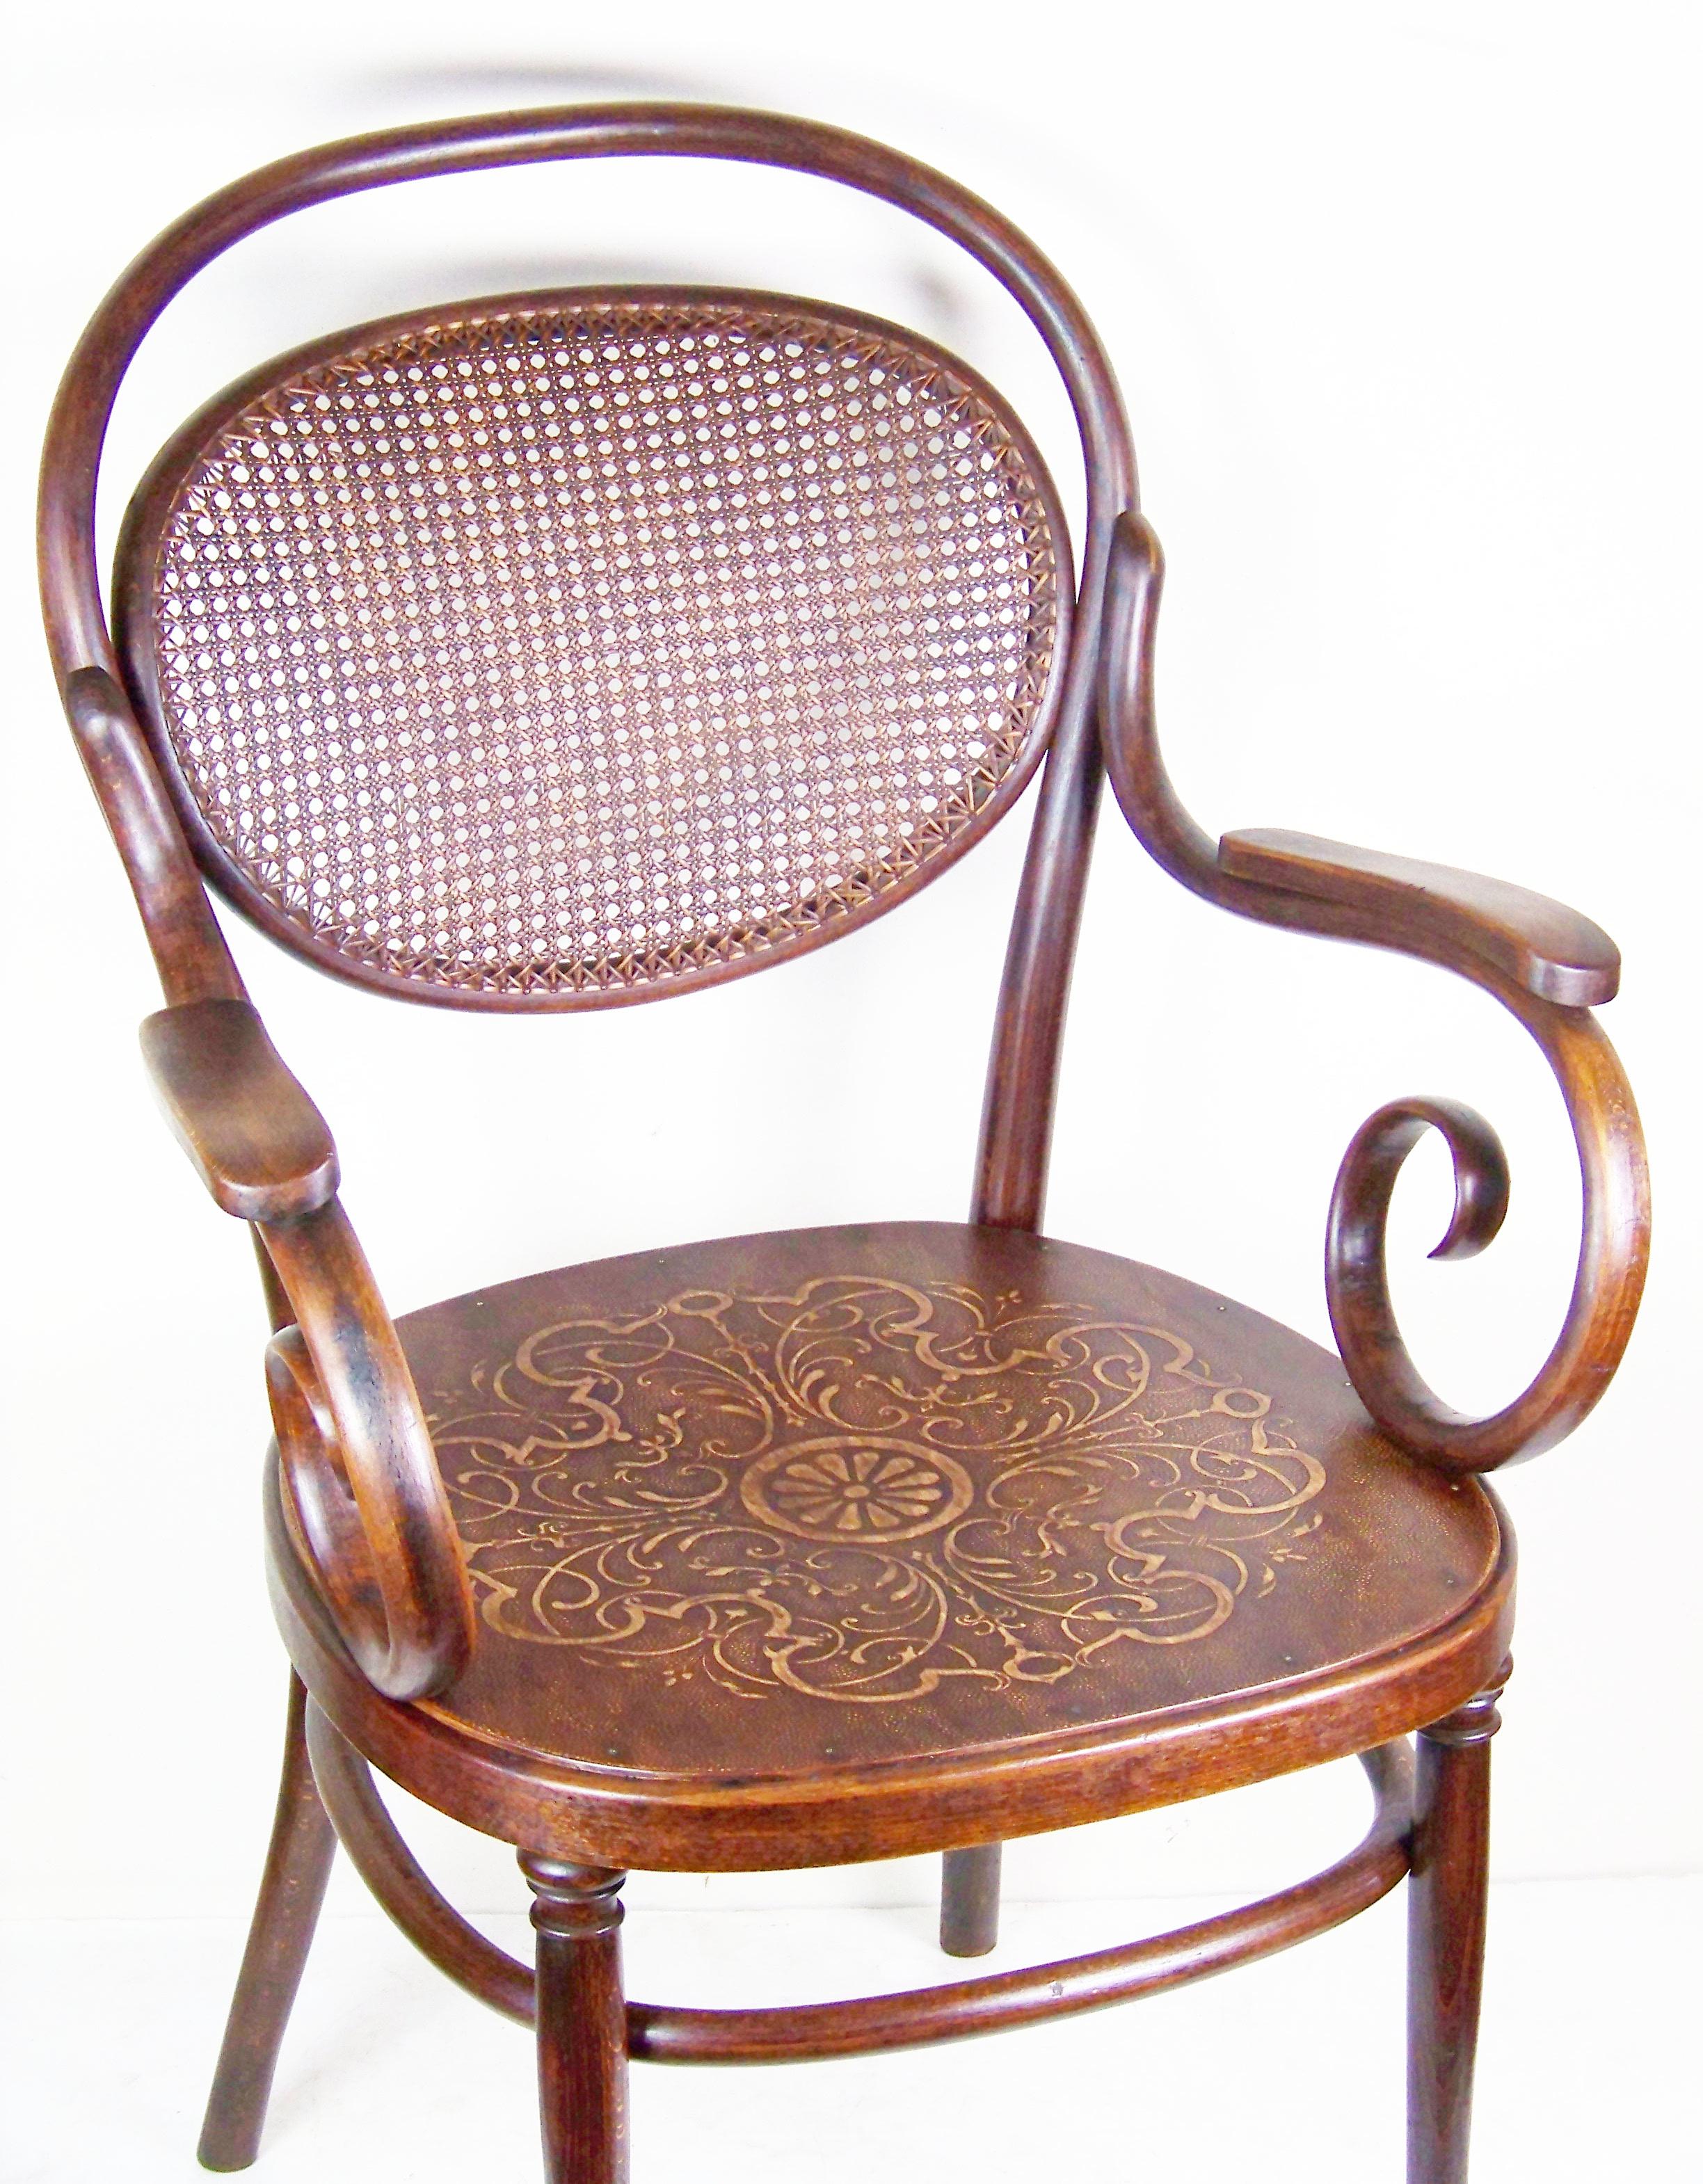 Solid and compact, perfectly cleaned and polished with French polish. The seat, originally woven with pedig, was replaced by a more durable plywood with art nouveau decor.